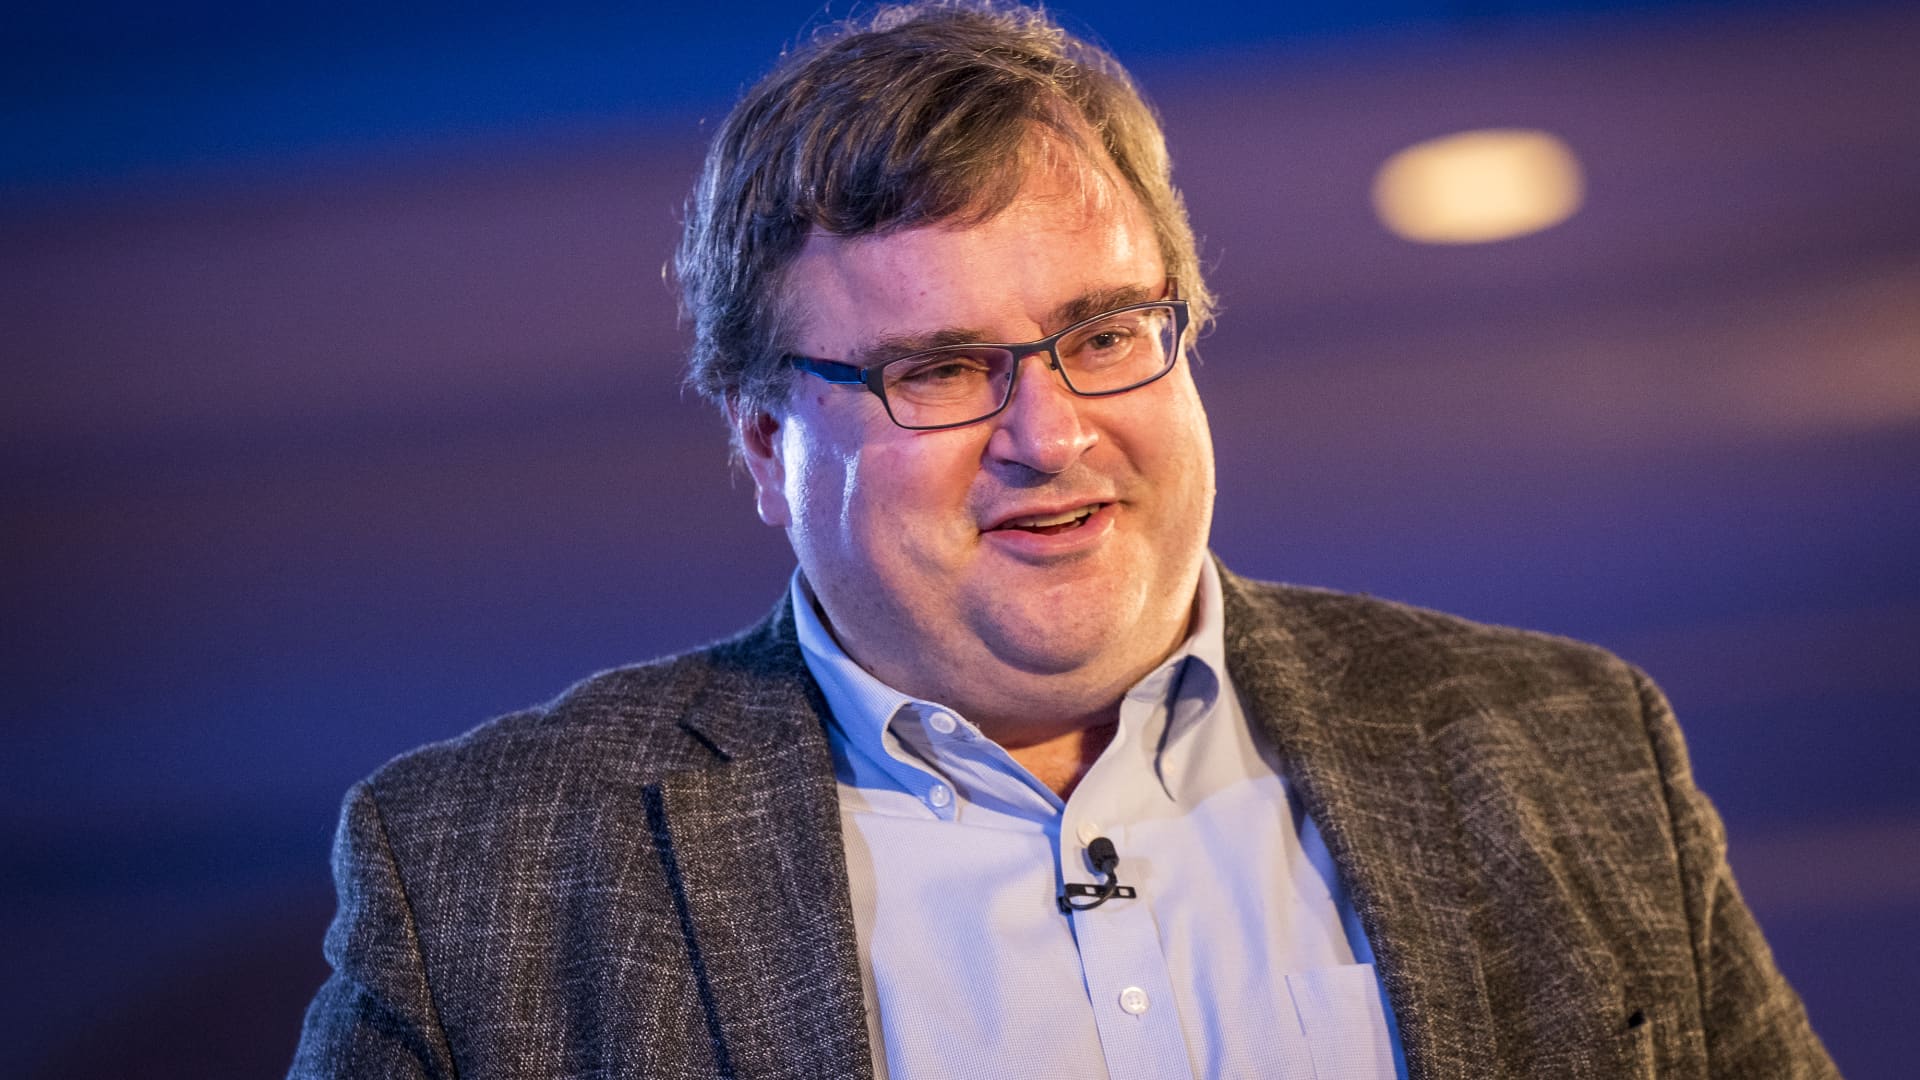 Reid Hoffman steps down from OpenAI board to avoid potential conflicts